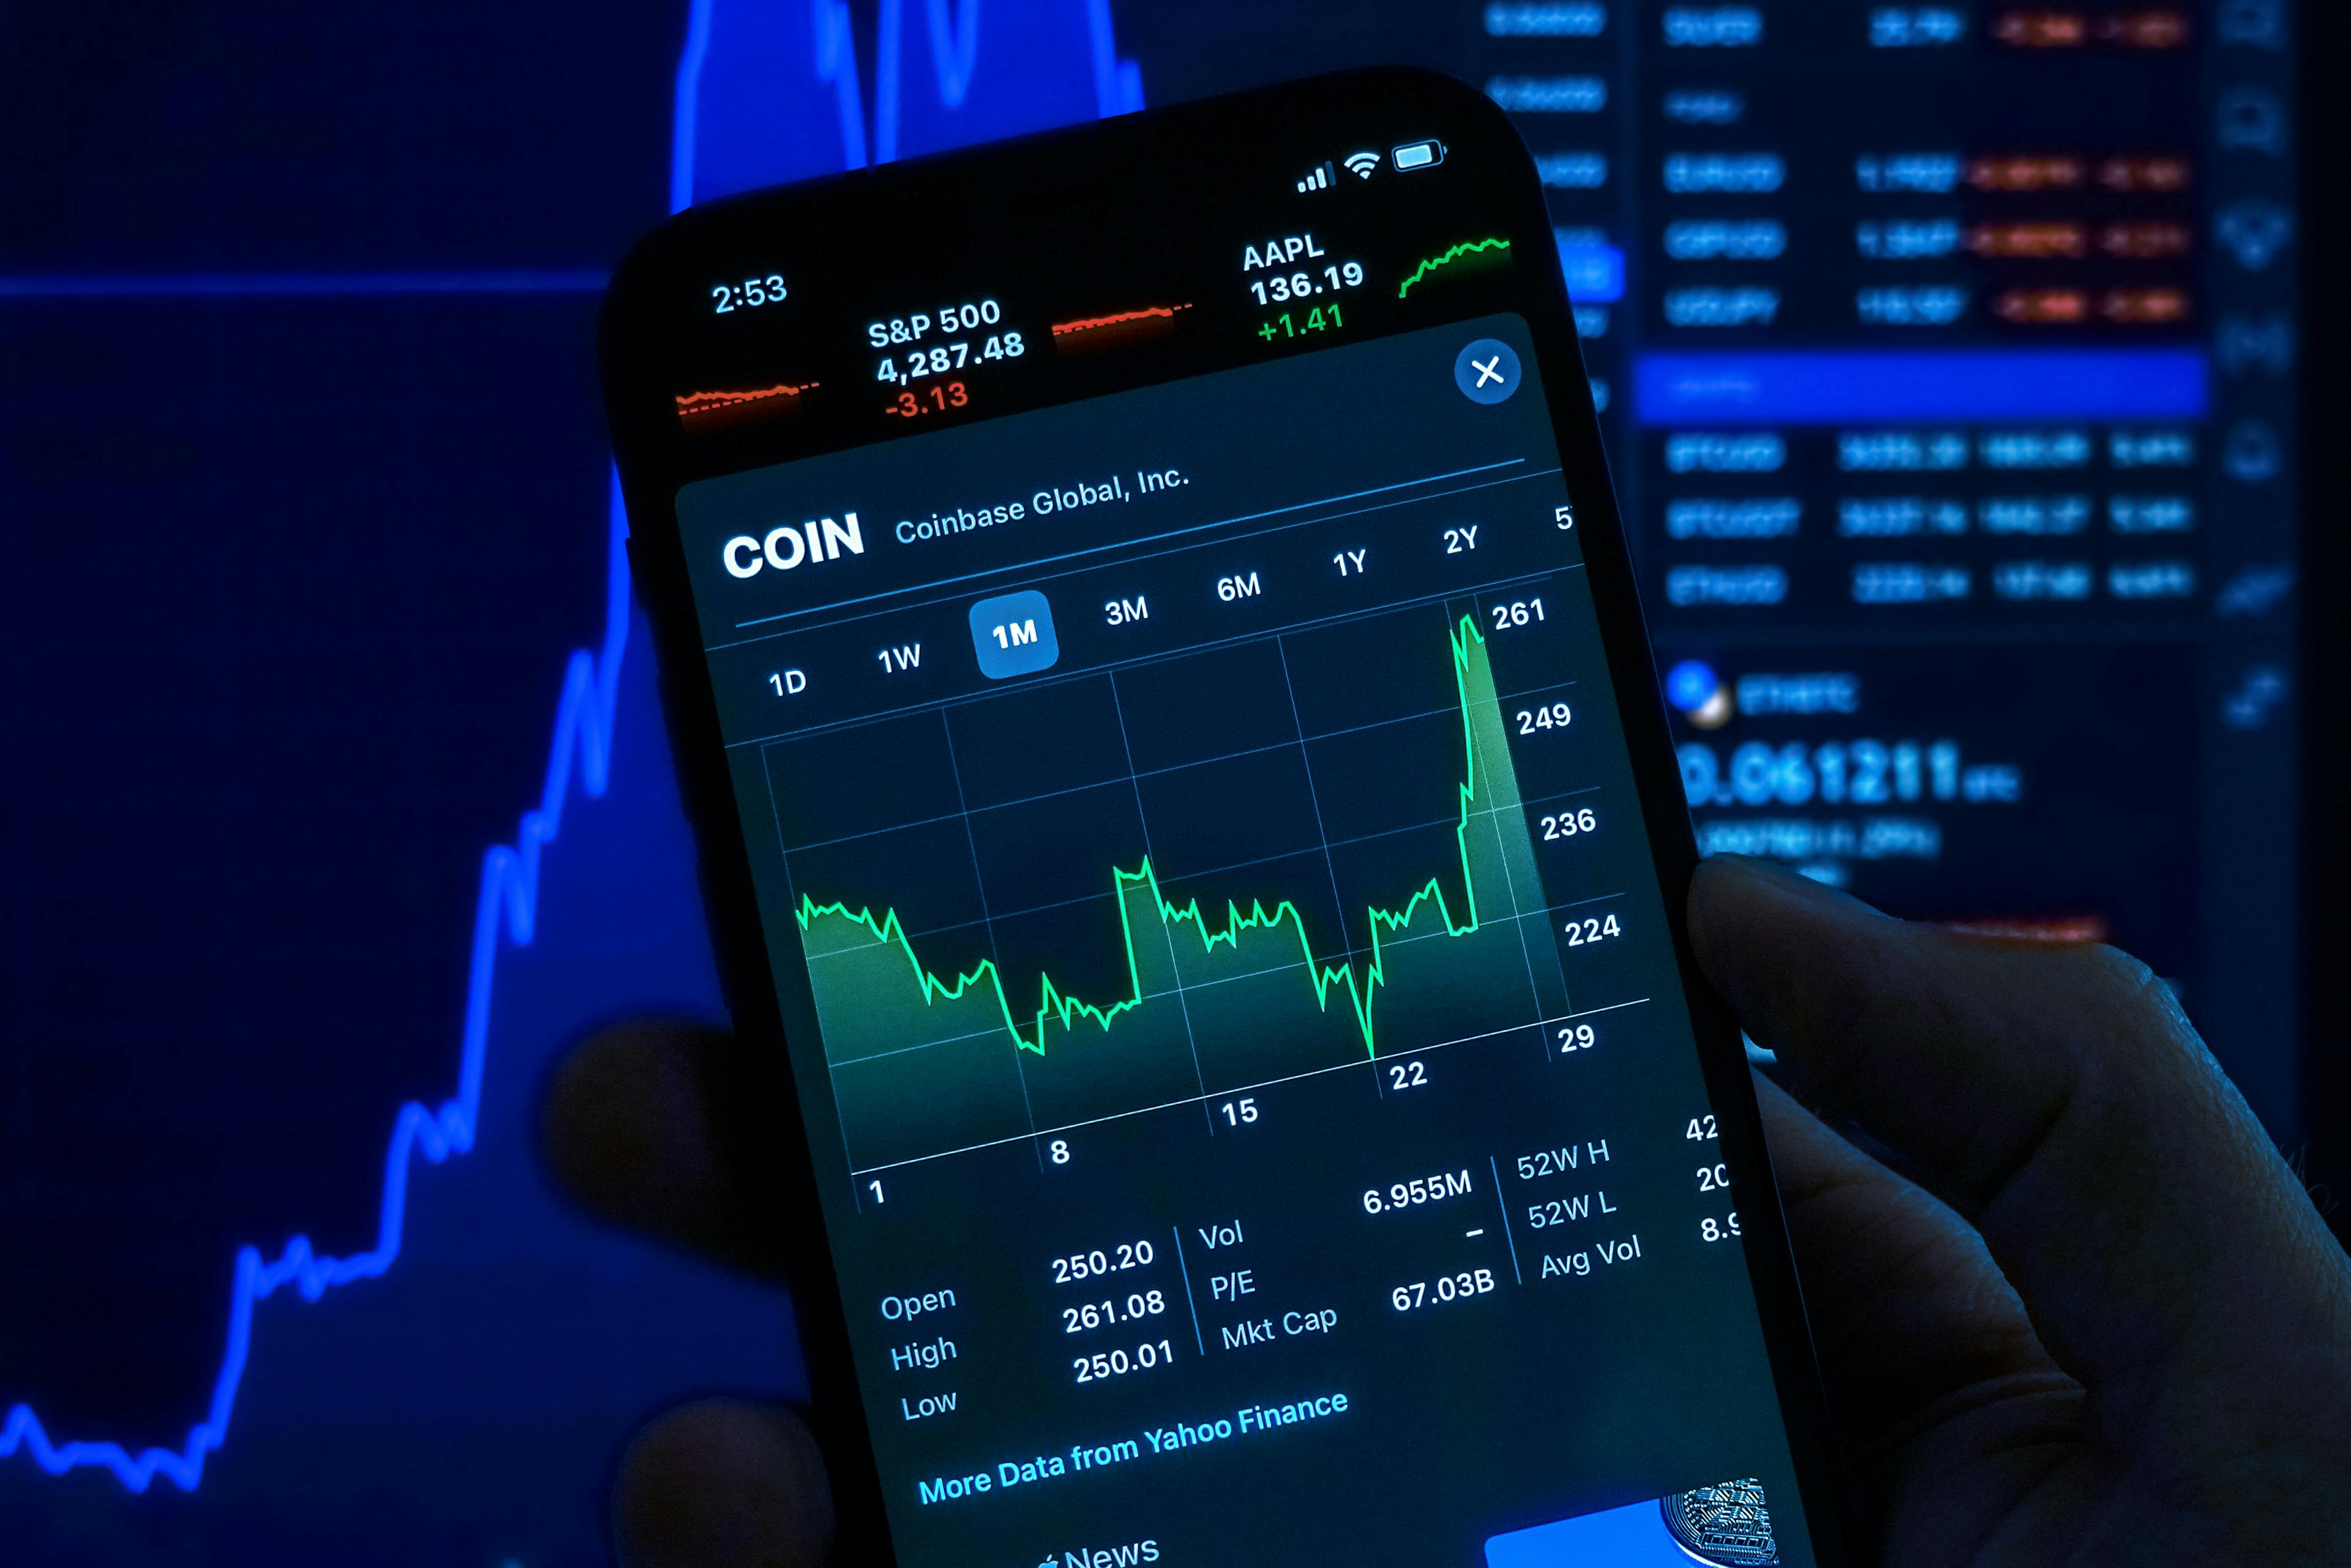 The Rise of Social Trading Platforms